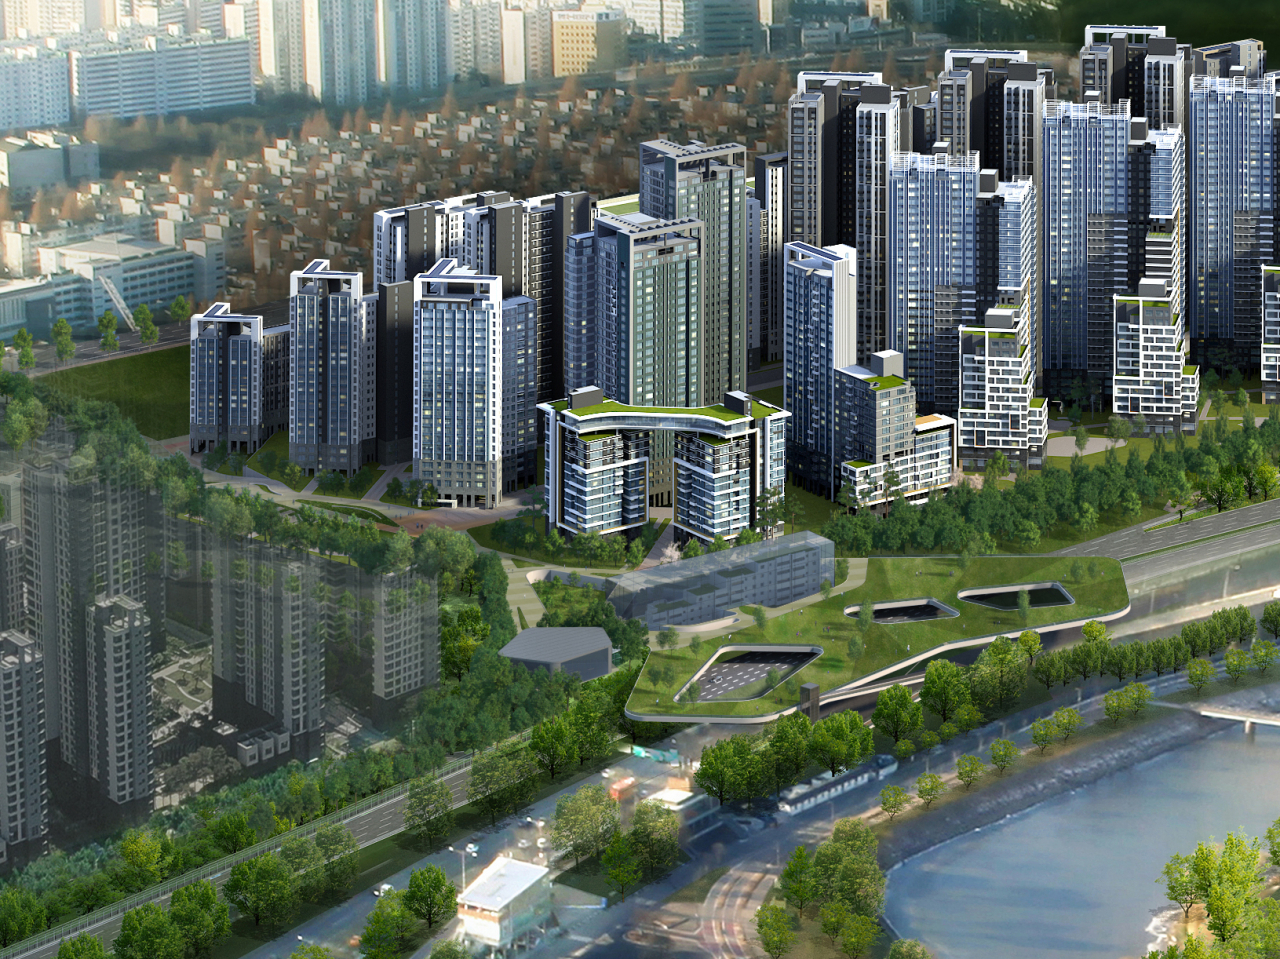 This image, provided by the Seoul city government, shows a rendering of the Banpo District Hangang Connection Park, to be built by 2027 as part of the city's pedestrian-friendly measures.